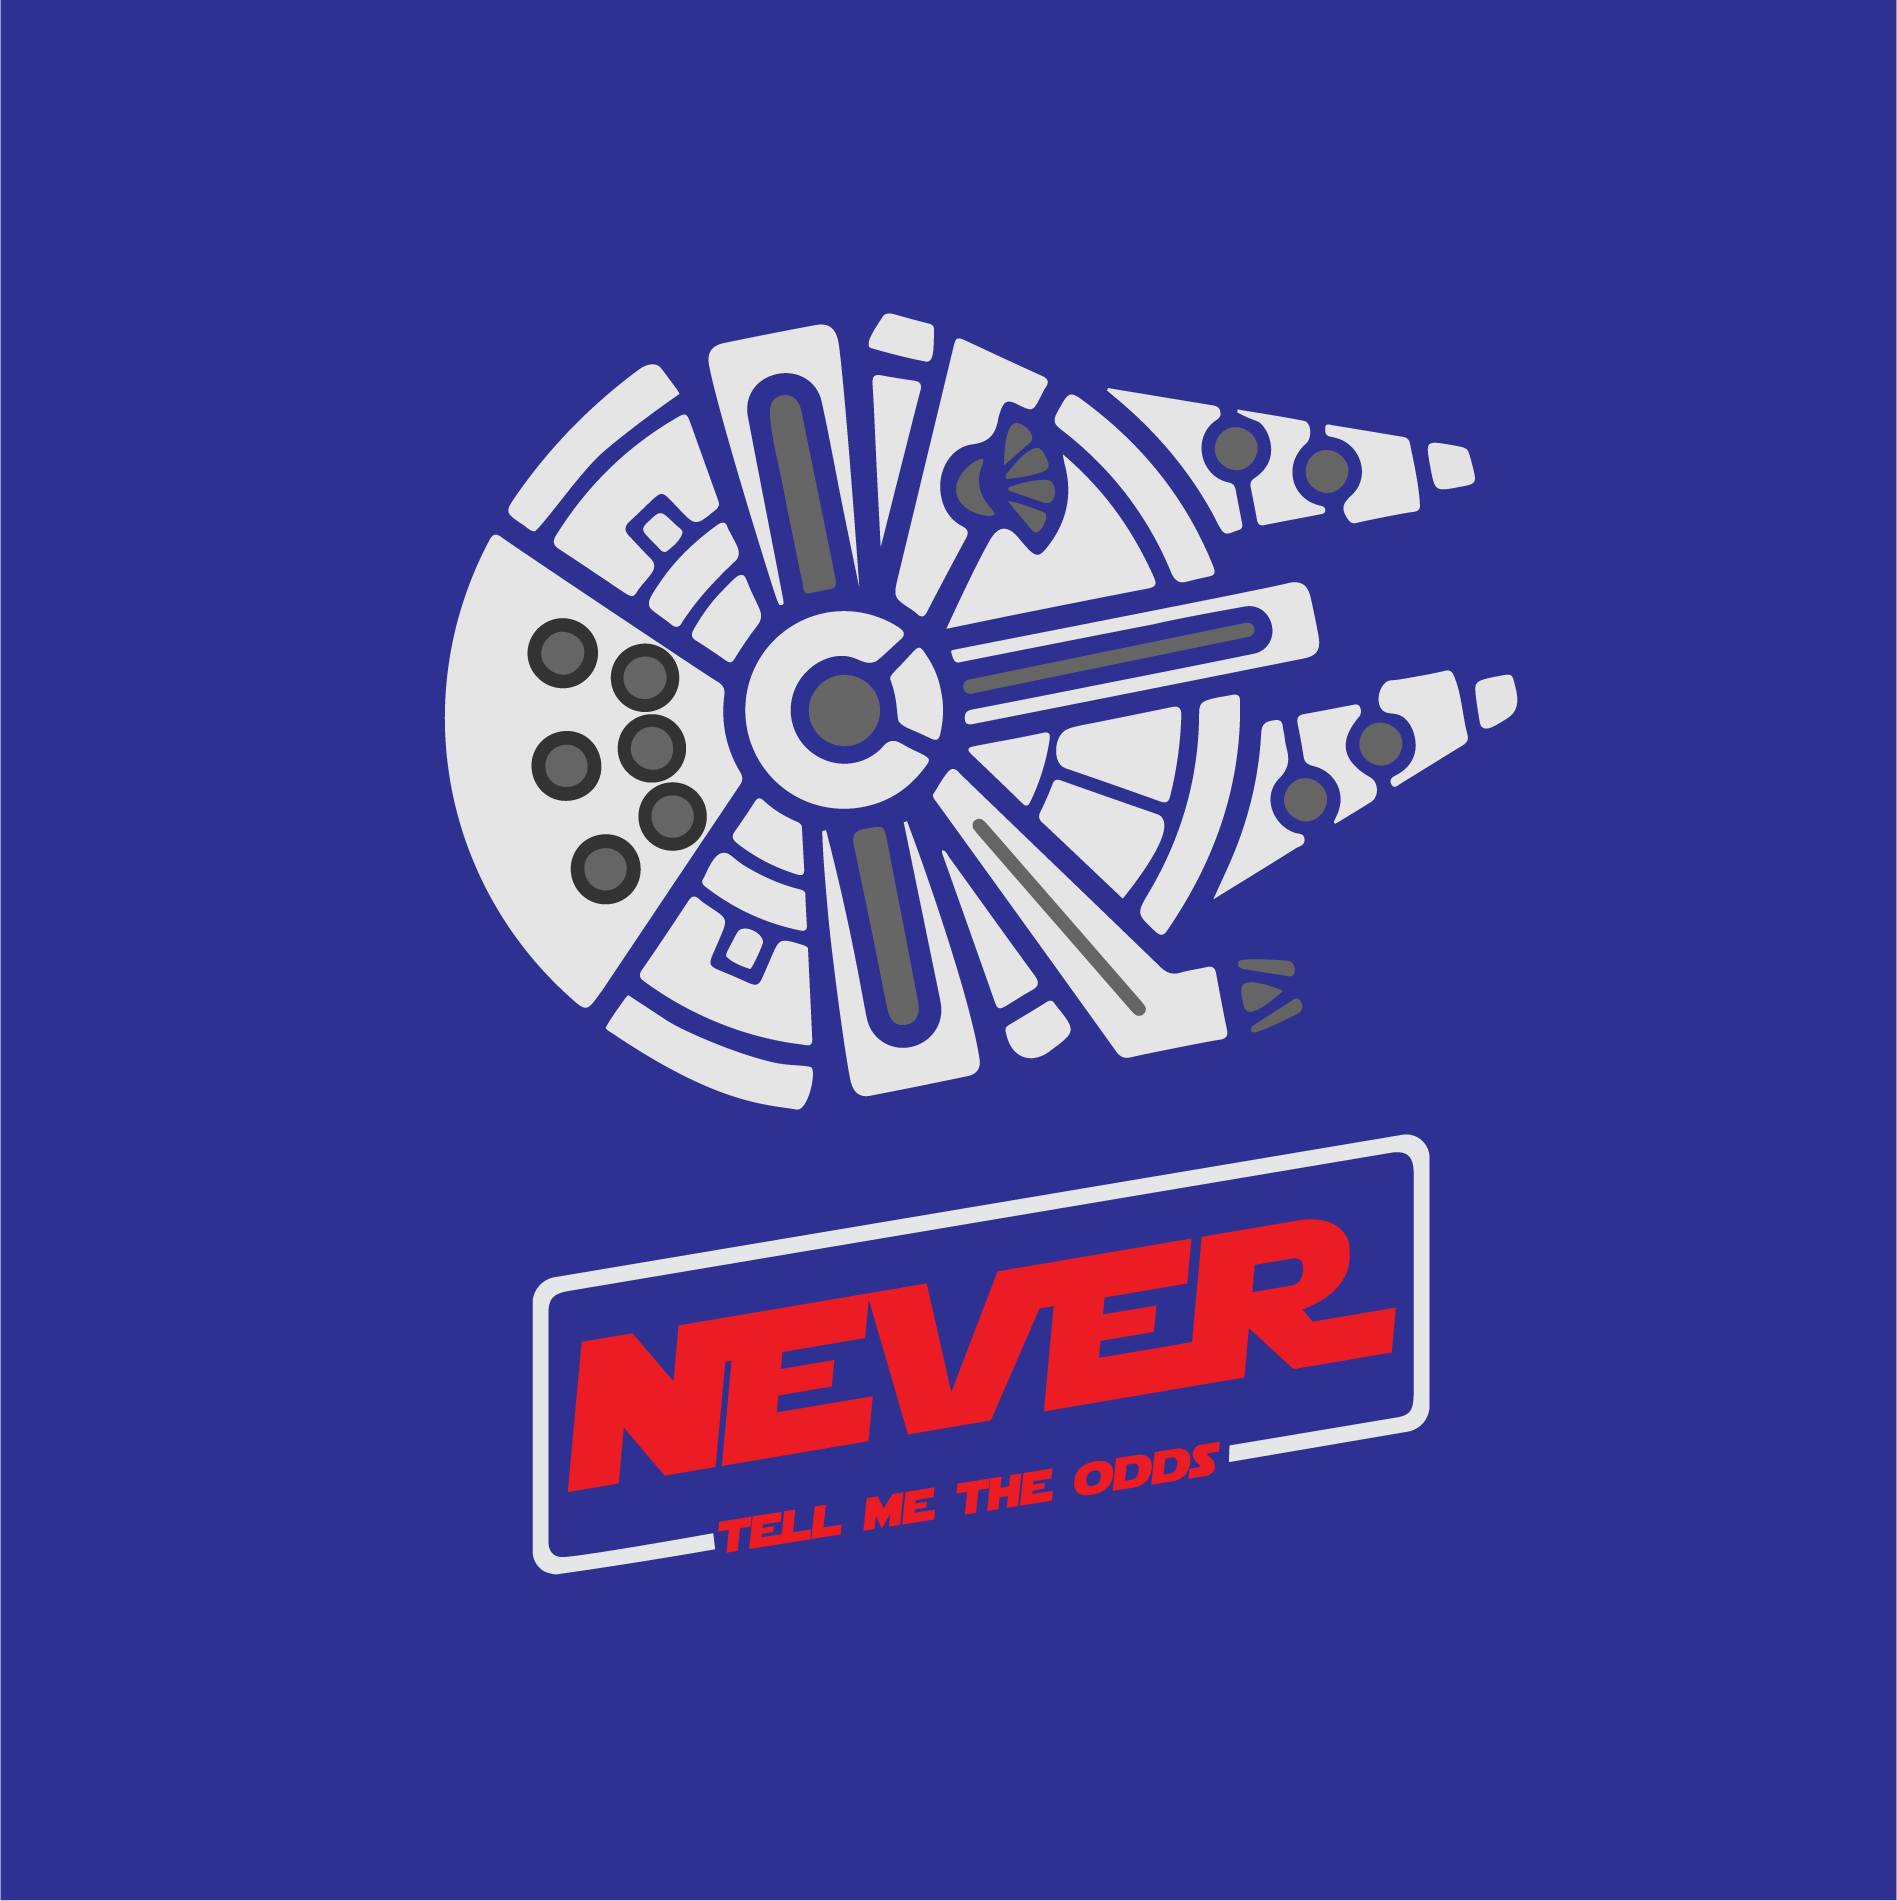 Download Millennium Falcon Star Wars Svg Dxf Eps Png Cut File Cricut And Si Paper Pi